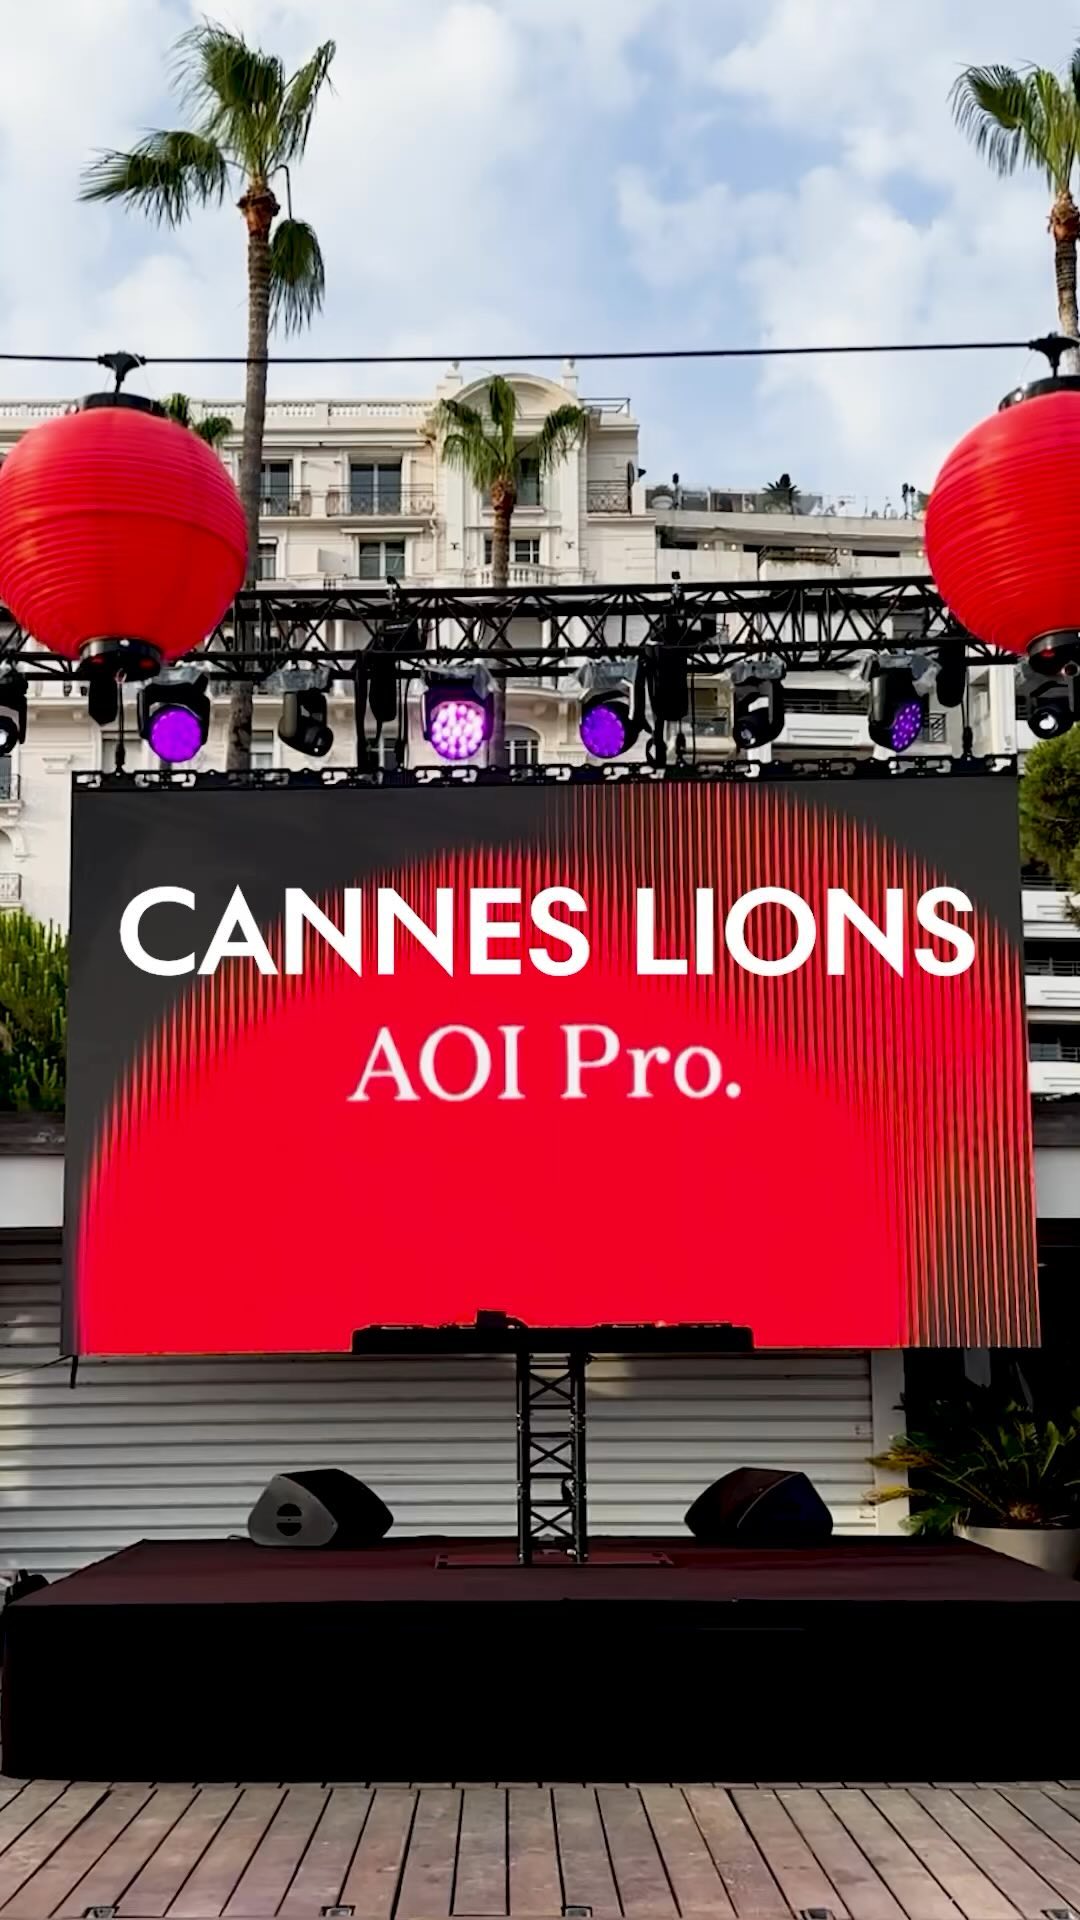 An unforgettable night with well over 1000 attendees at Cannes Beach!
We are truly thankful for your attendance and the vibrant energy you brought!

As AOI celebrates 60 years of bringing ideas to life, we look forward to welcoming you all in Tokyo!

@cannes_lions @aoipro @aoiglobal